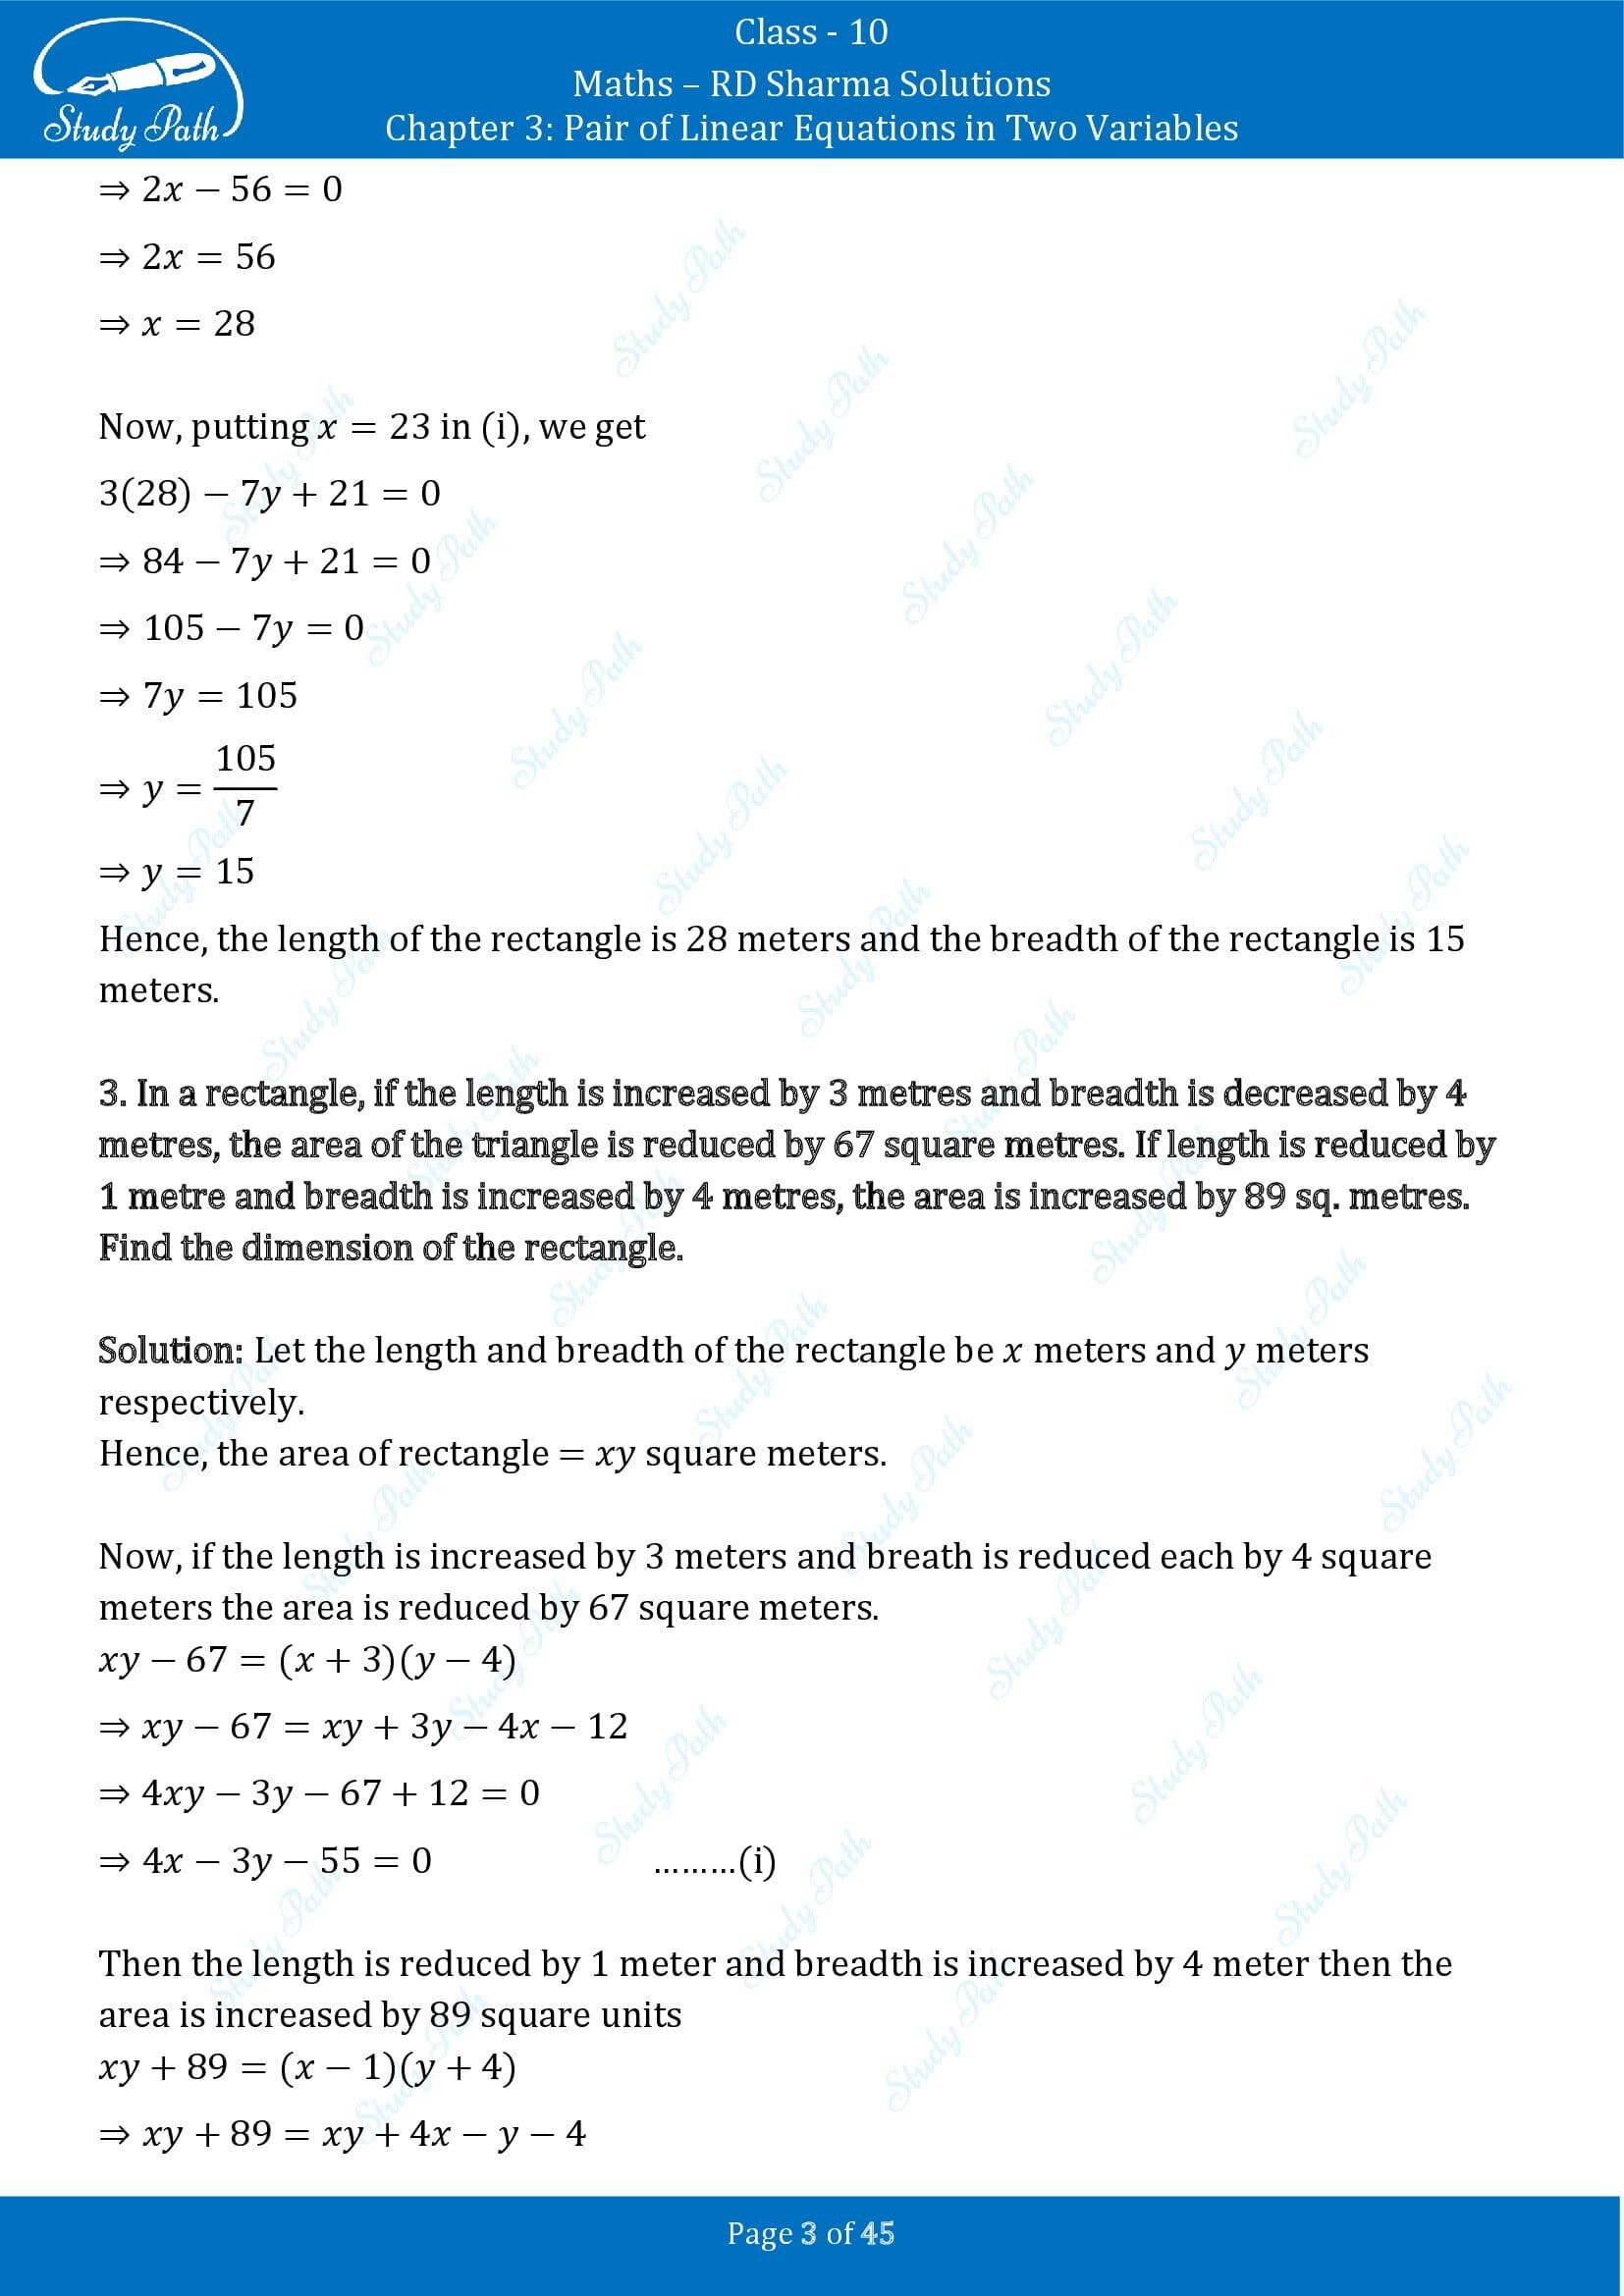 RD Sharma Solutions Class 10 Chapter 3 Pair of Linear Equations in Two Variables Exercise 3.11 00003